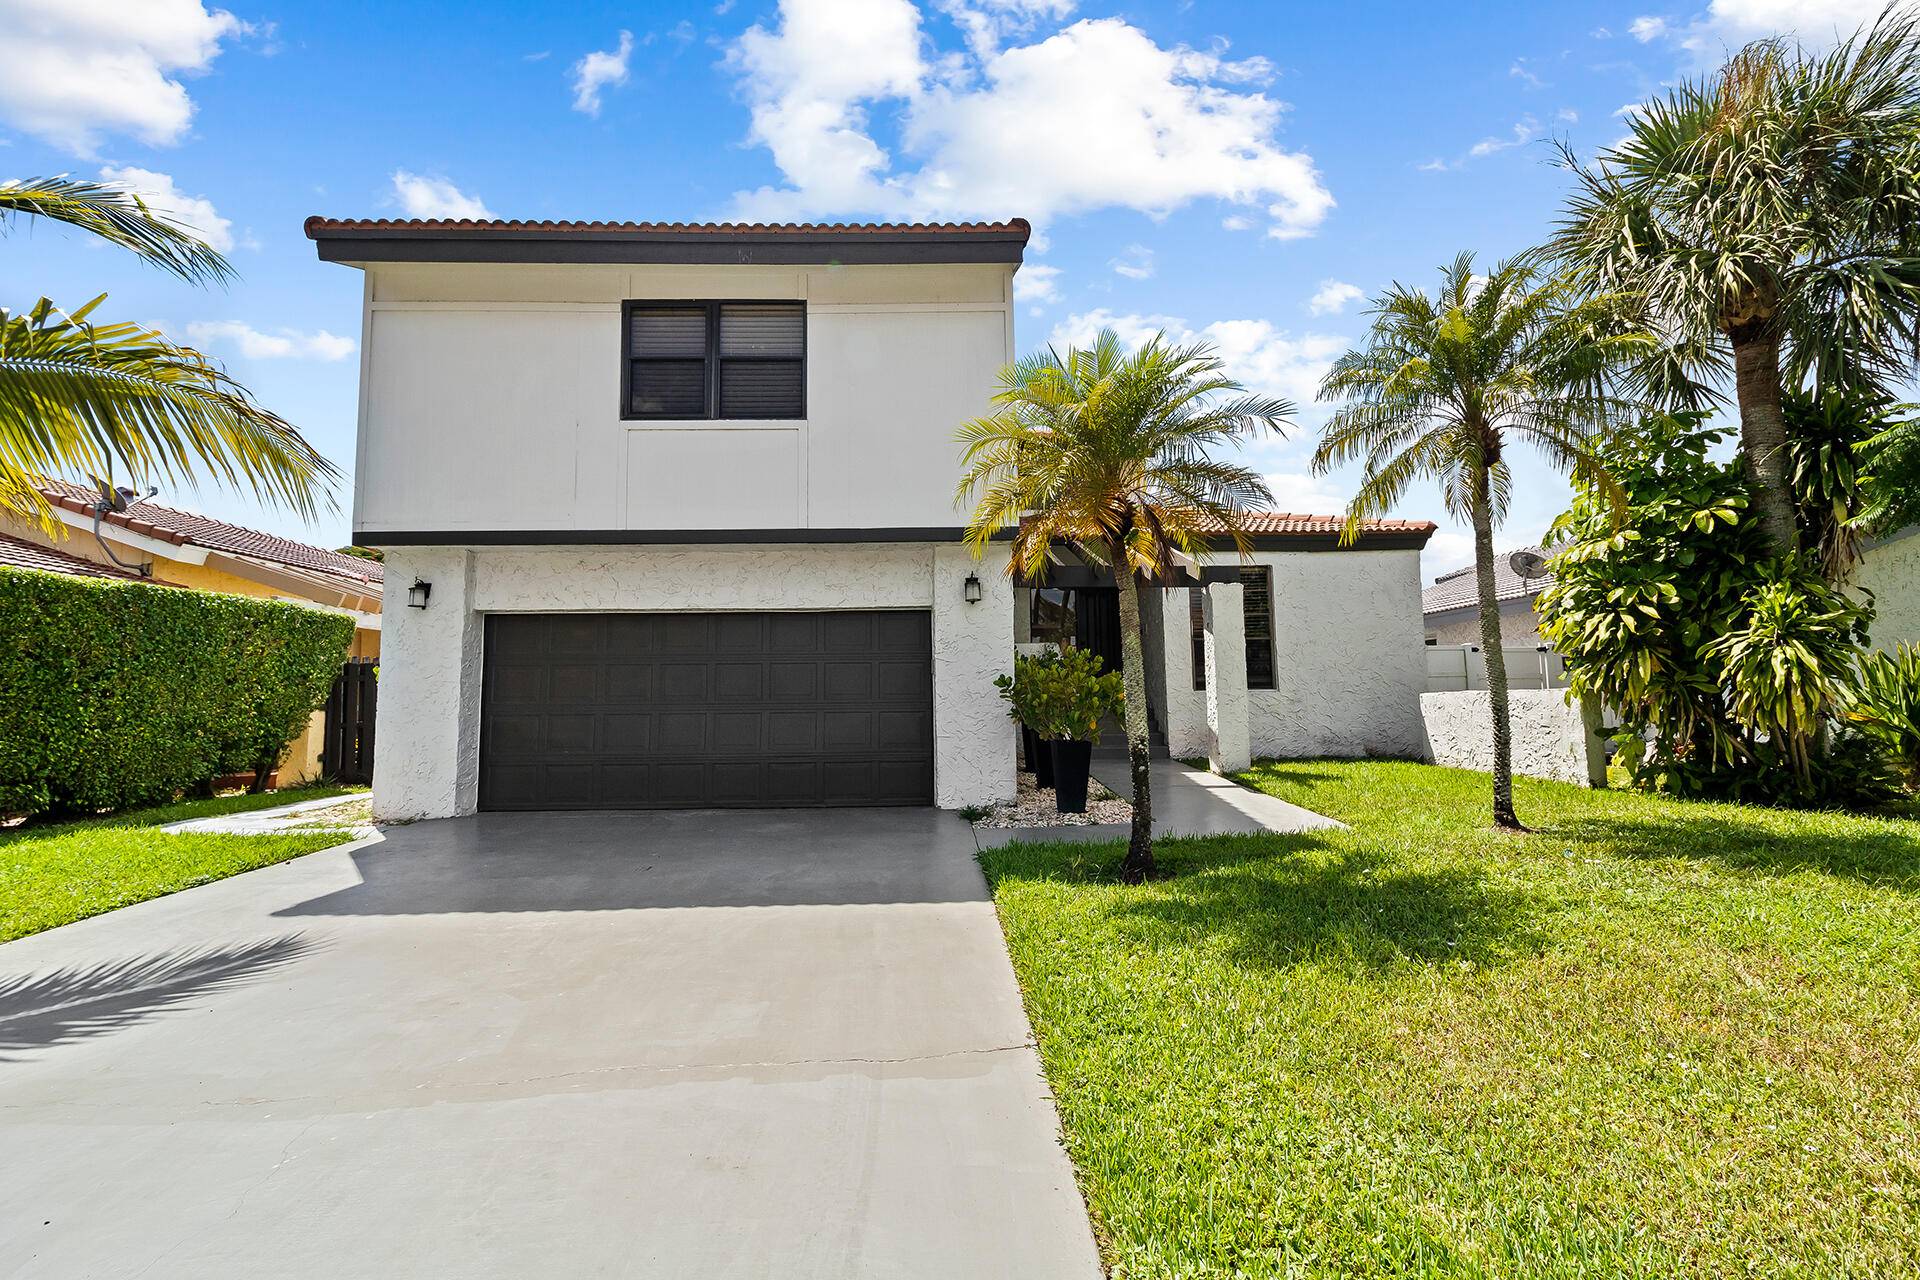 Beautifully redone four bedroom two story home in Vista Verde.